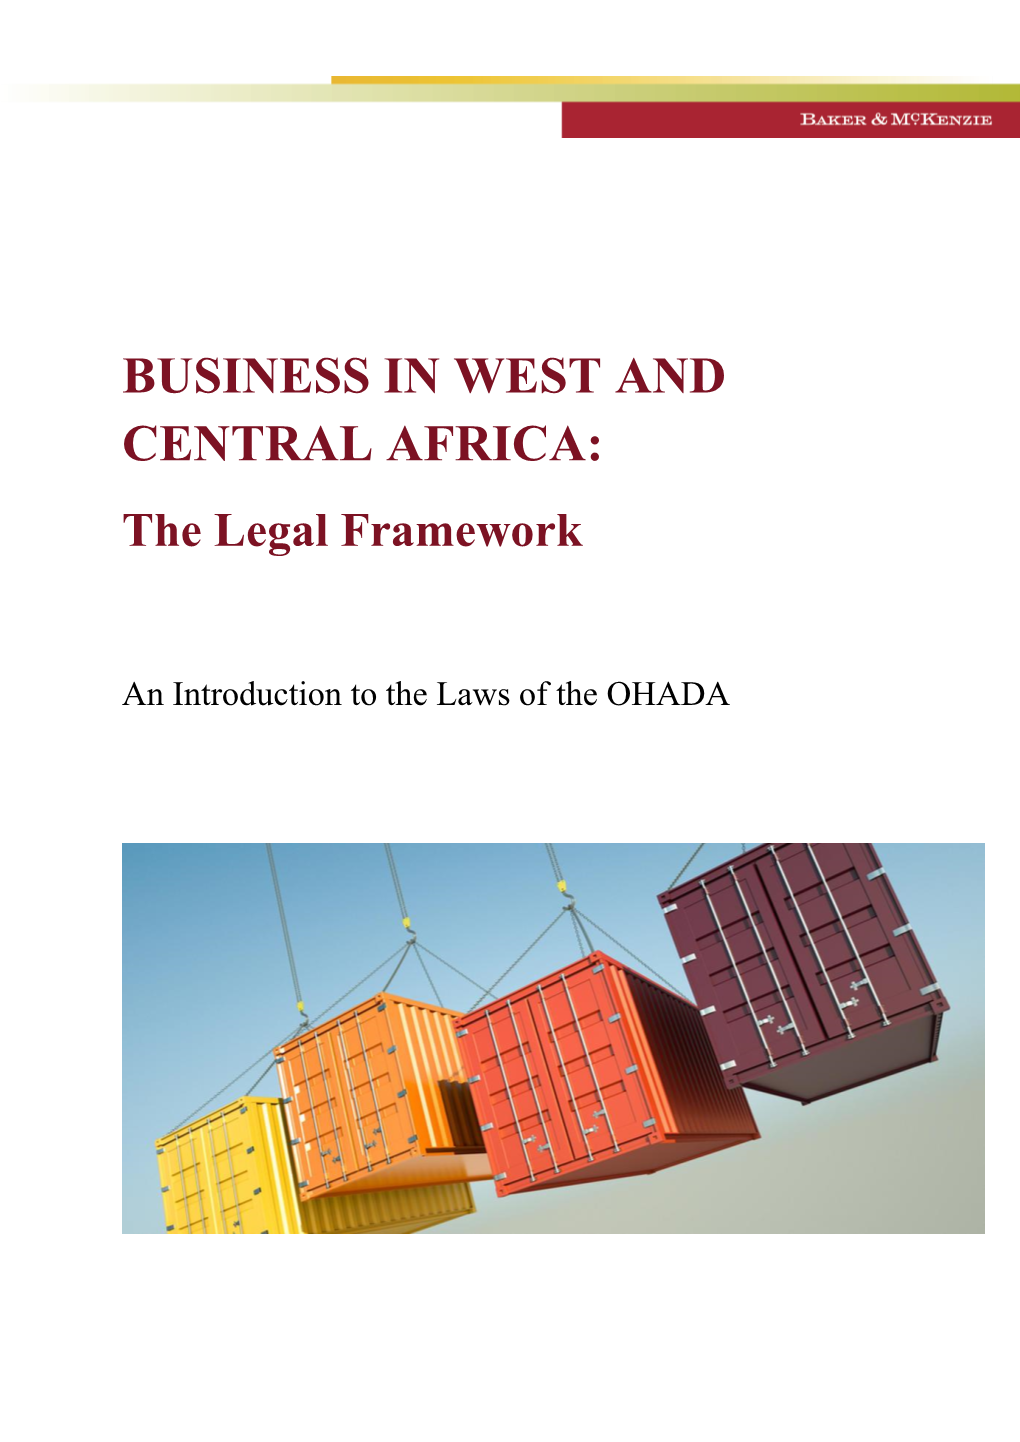 BUSINESS in WEST and CENTRAL AFRICA: the Legal Framework